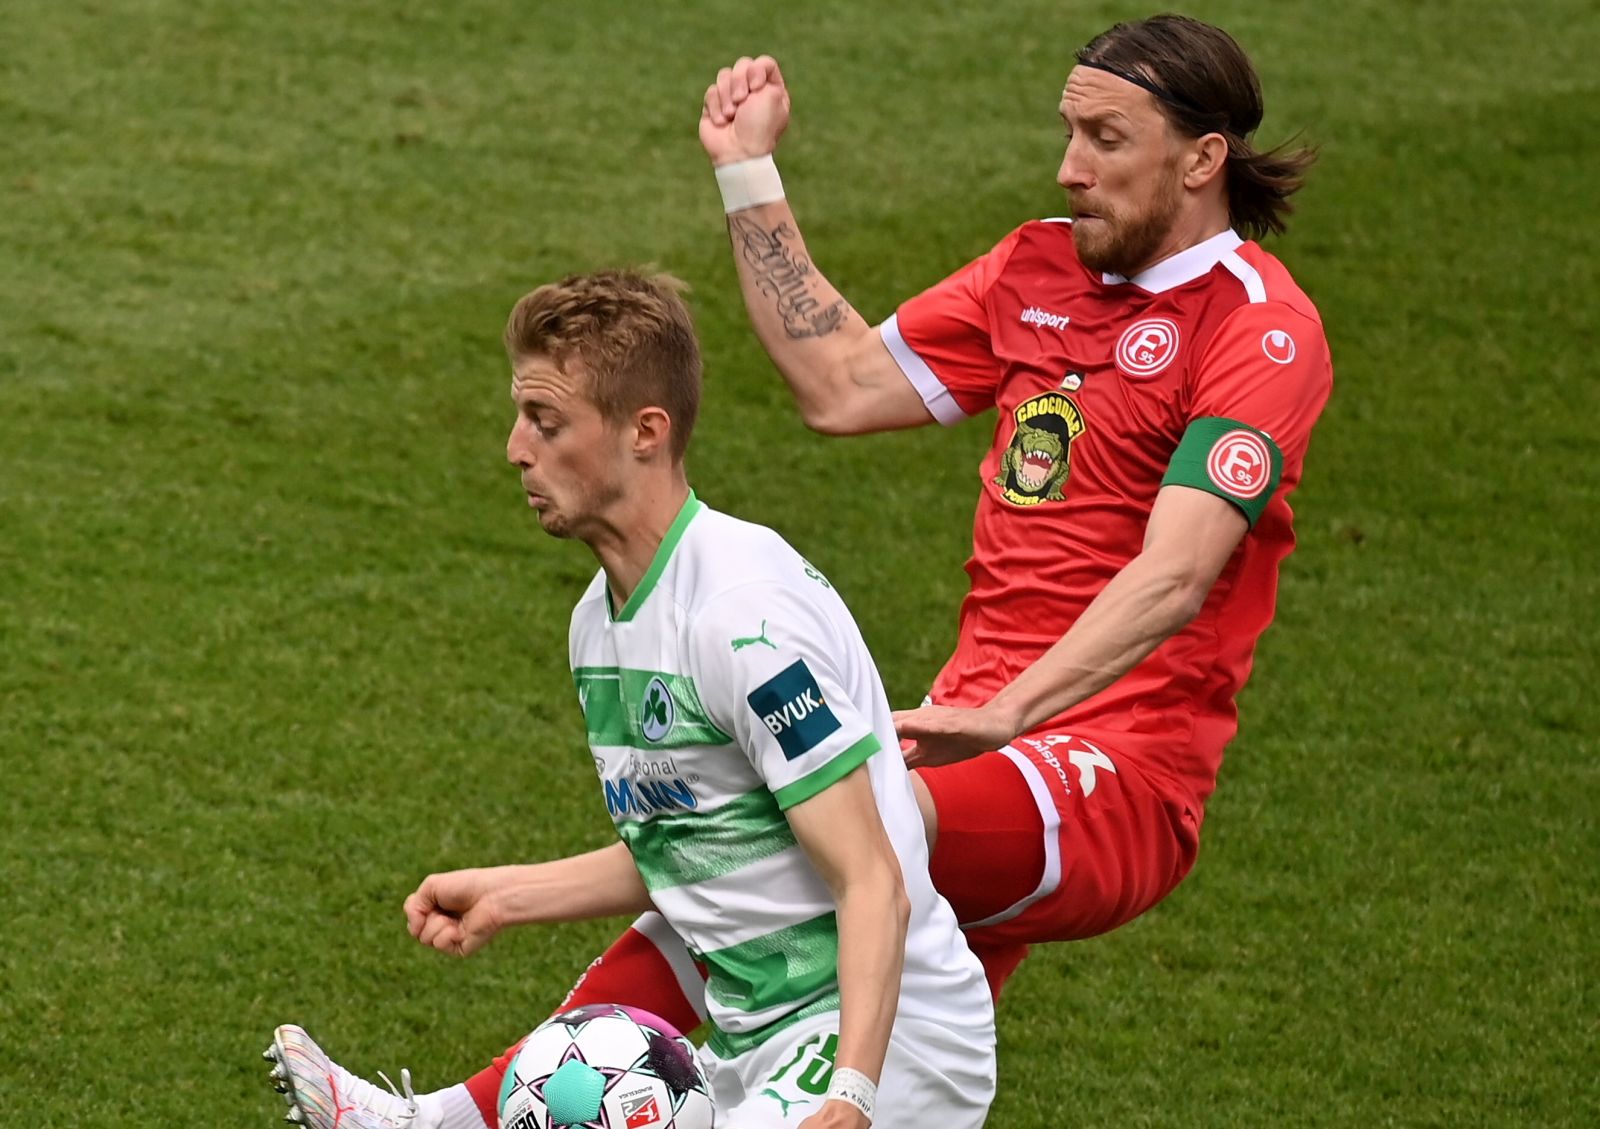 epa09222584 Fuert's Sebastian Ernst (L) and Duesseldorf's Adam Bodzek (R) in action during the German Bundesliga Second Division soccer match between SpVgg Greuther Fuerth and Fortuna Duesseldorf in Fuerth, Germany, 23 May 2021.  EPA/PHILIPP GUELLAND CONDITIONS - ATTENTION: The DFL regulations prohibit any use of photographs as image sequences and/or quasi-video.